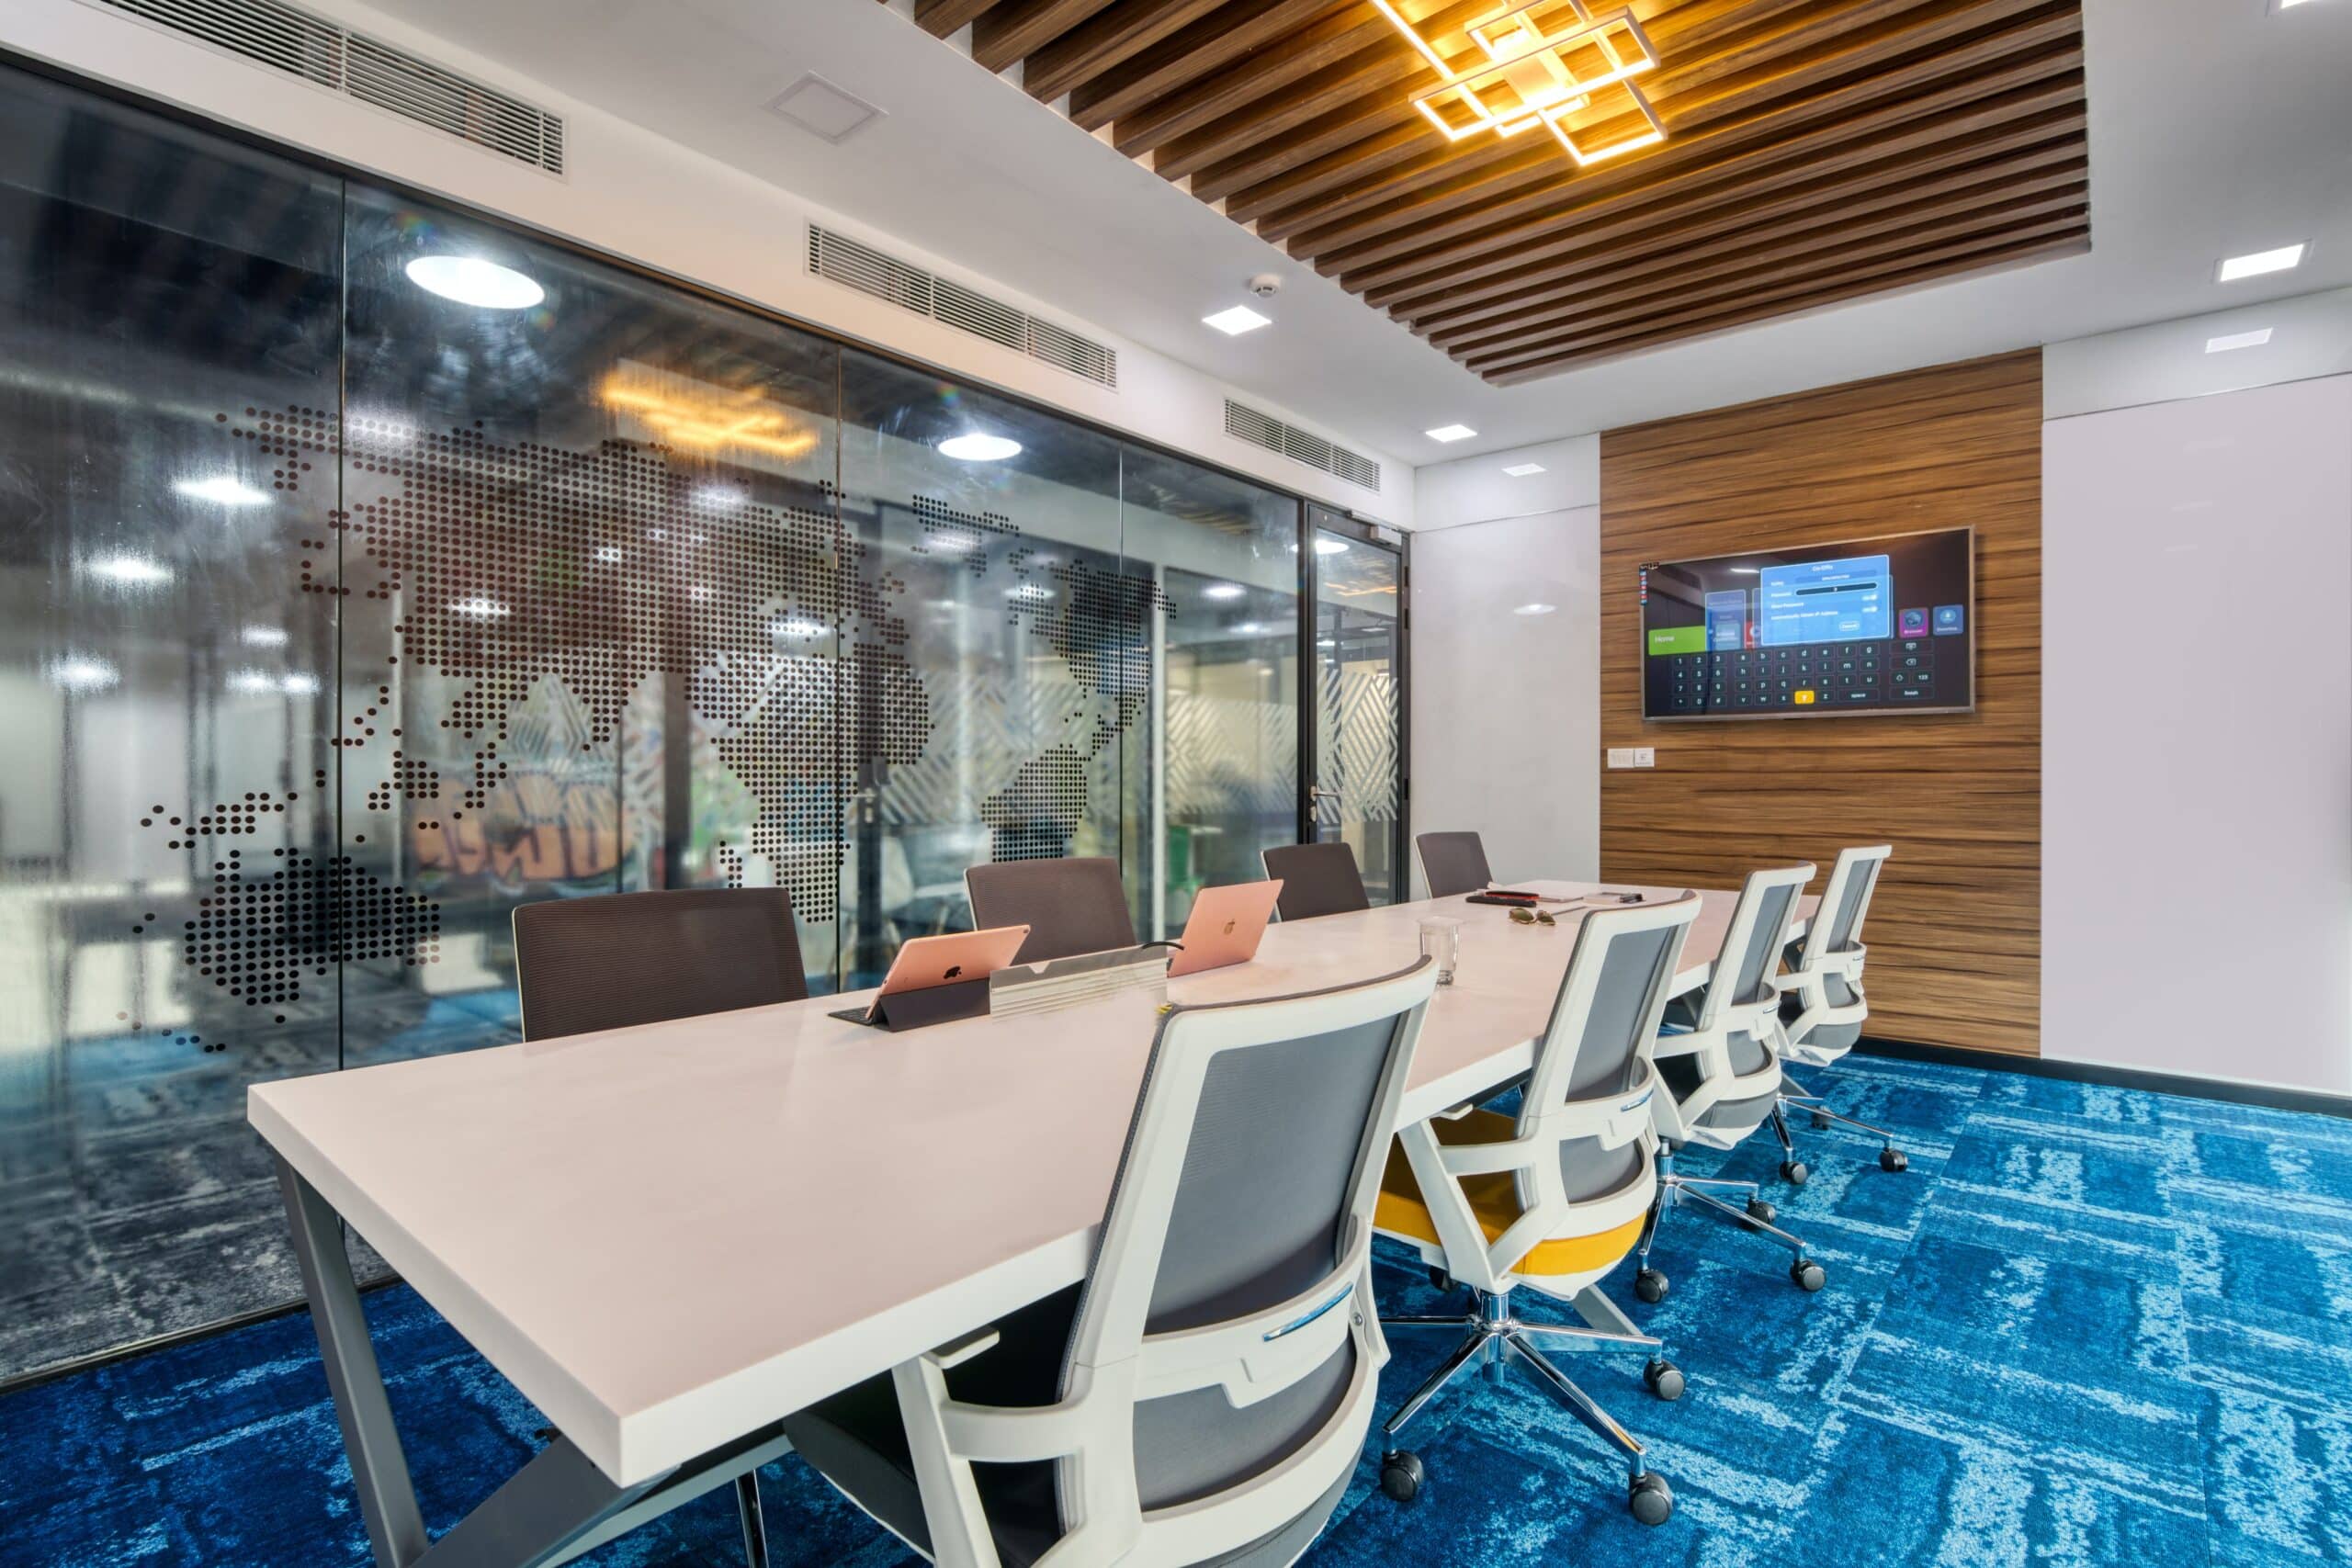 Image of a conference room with a smart display